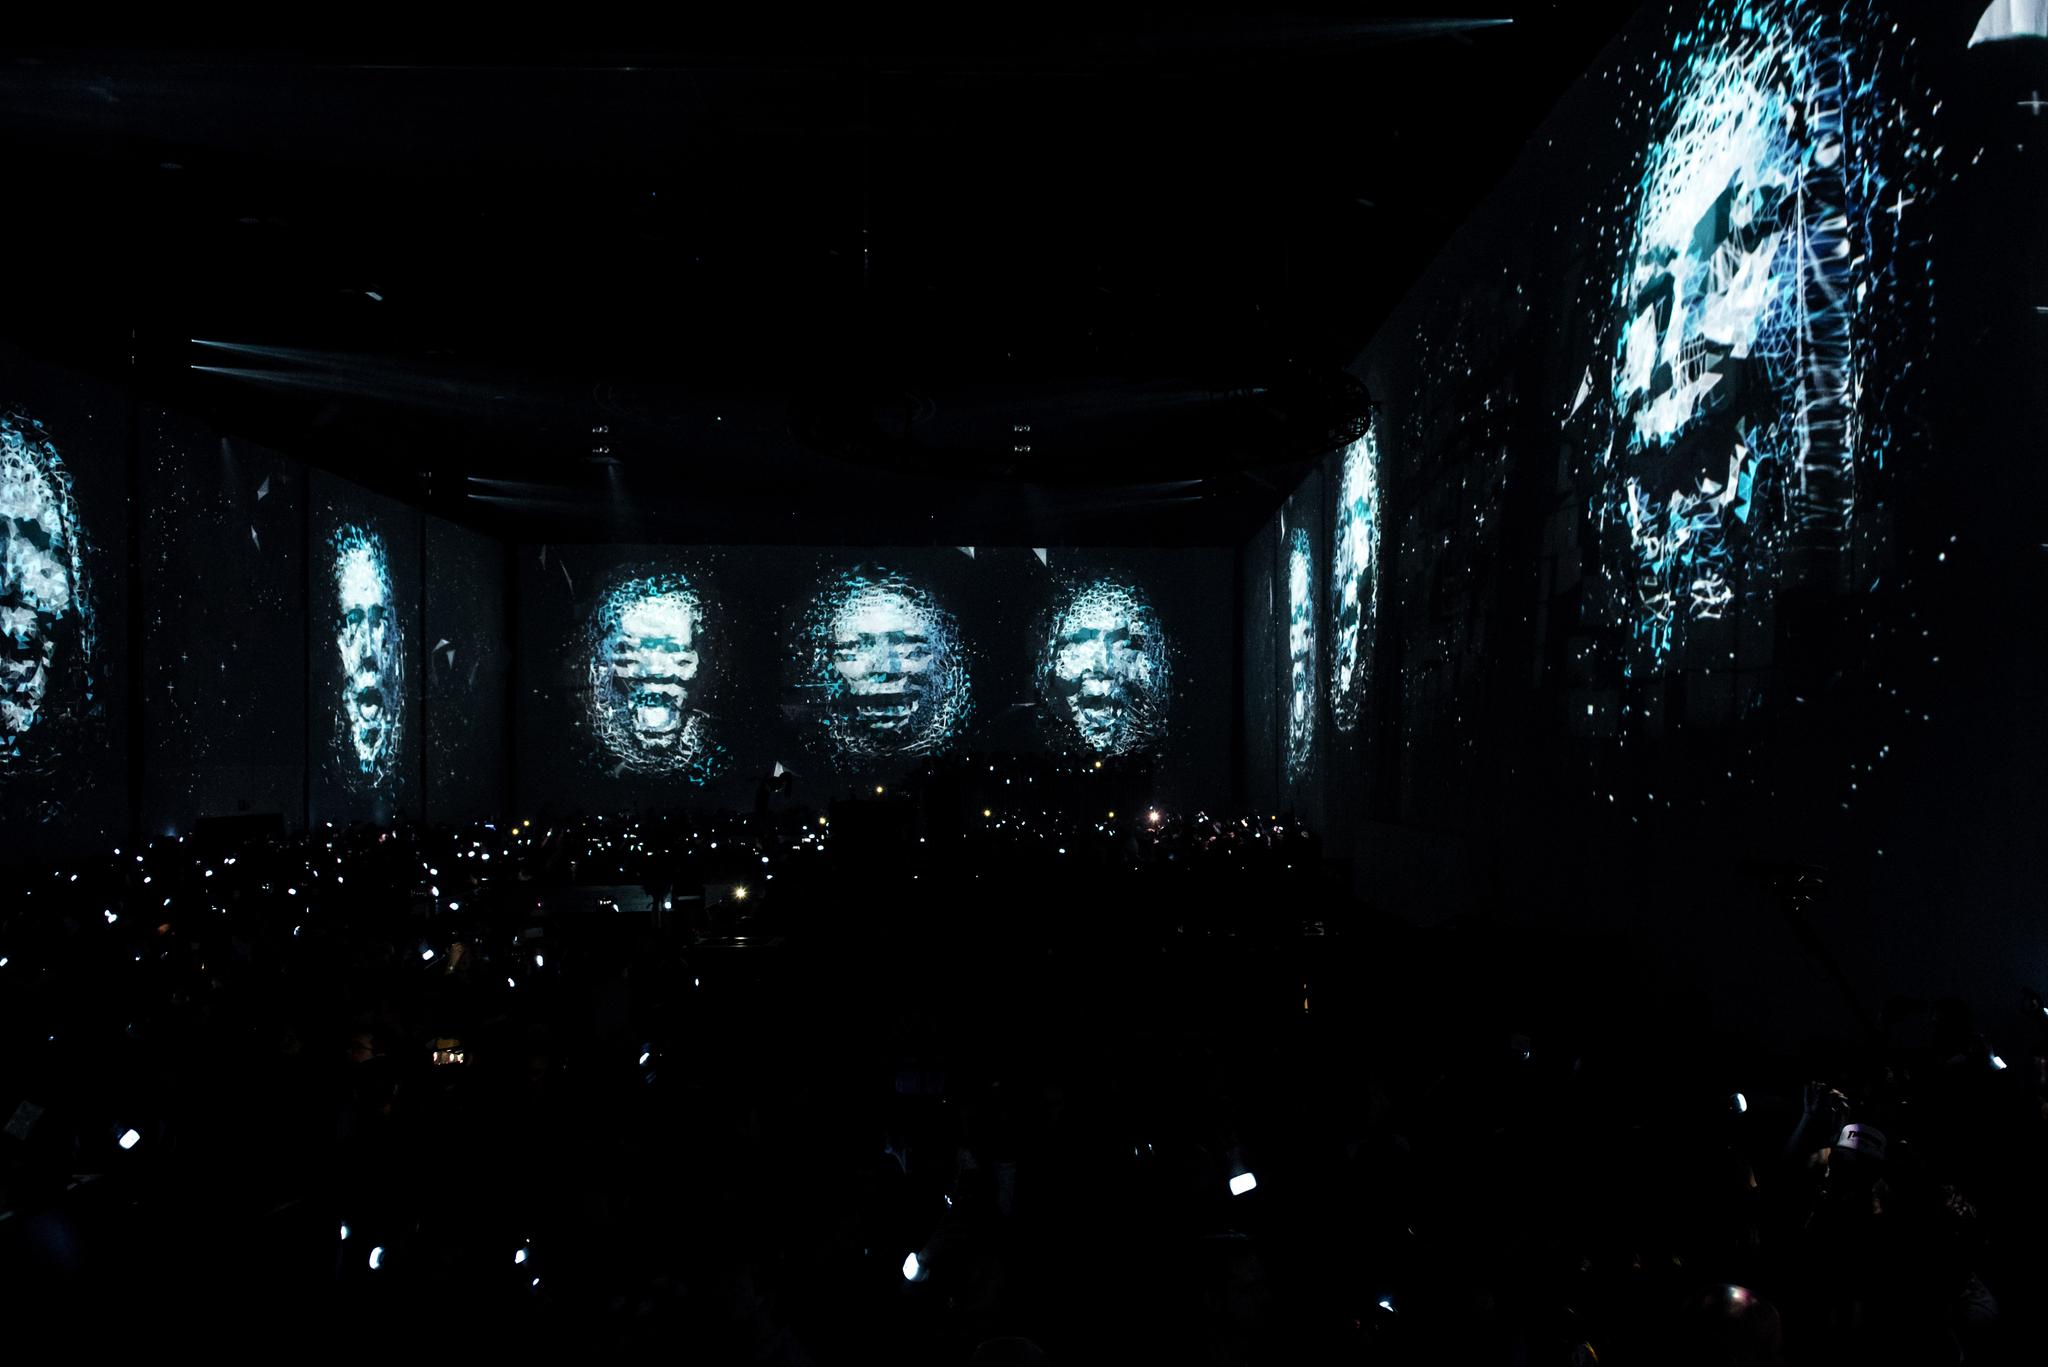 Projection mapping of faces cover the walls of a club environment.